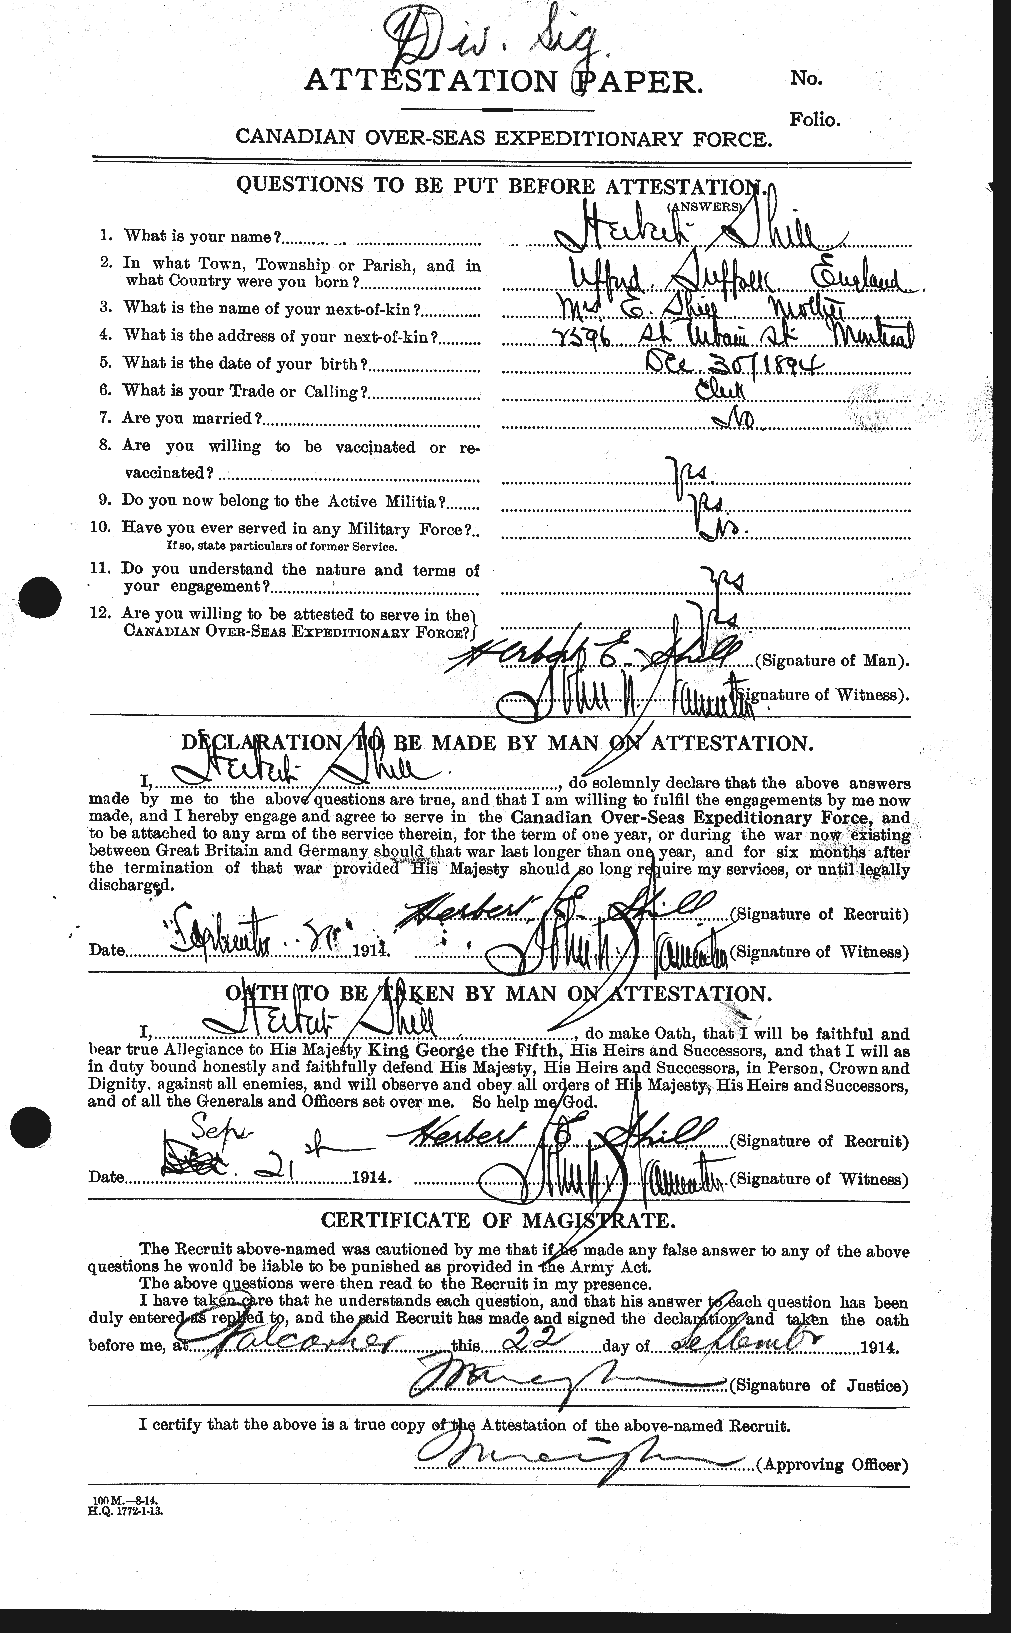 Personnel Records of the First World War - CEF 095899a